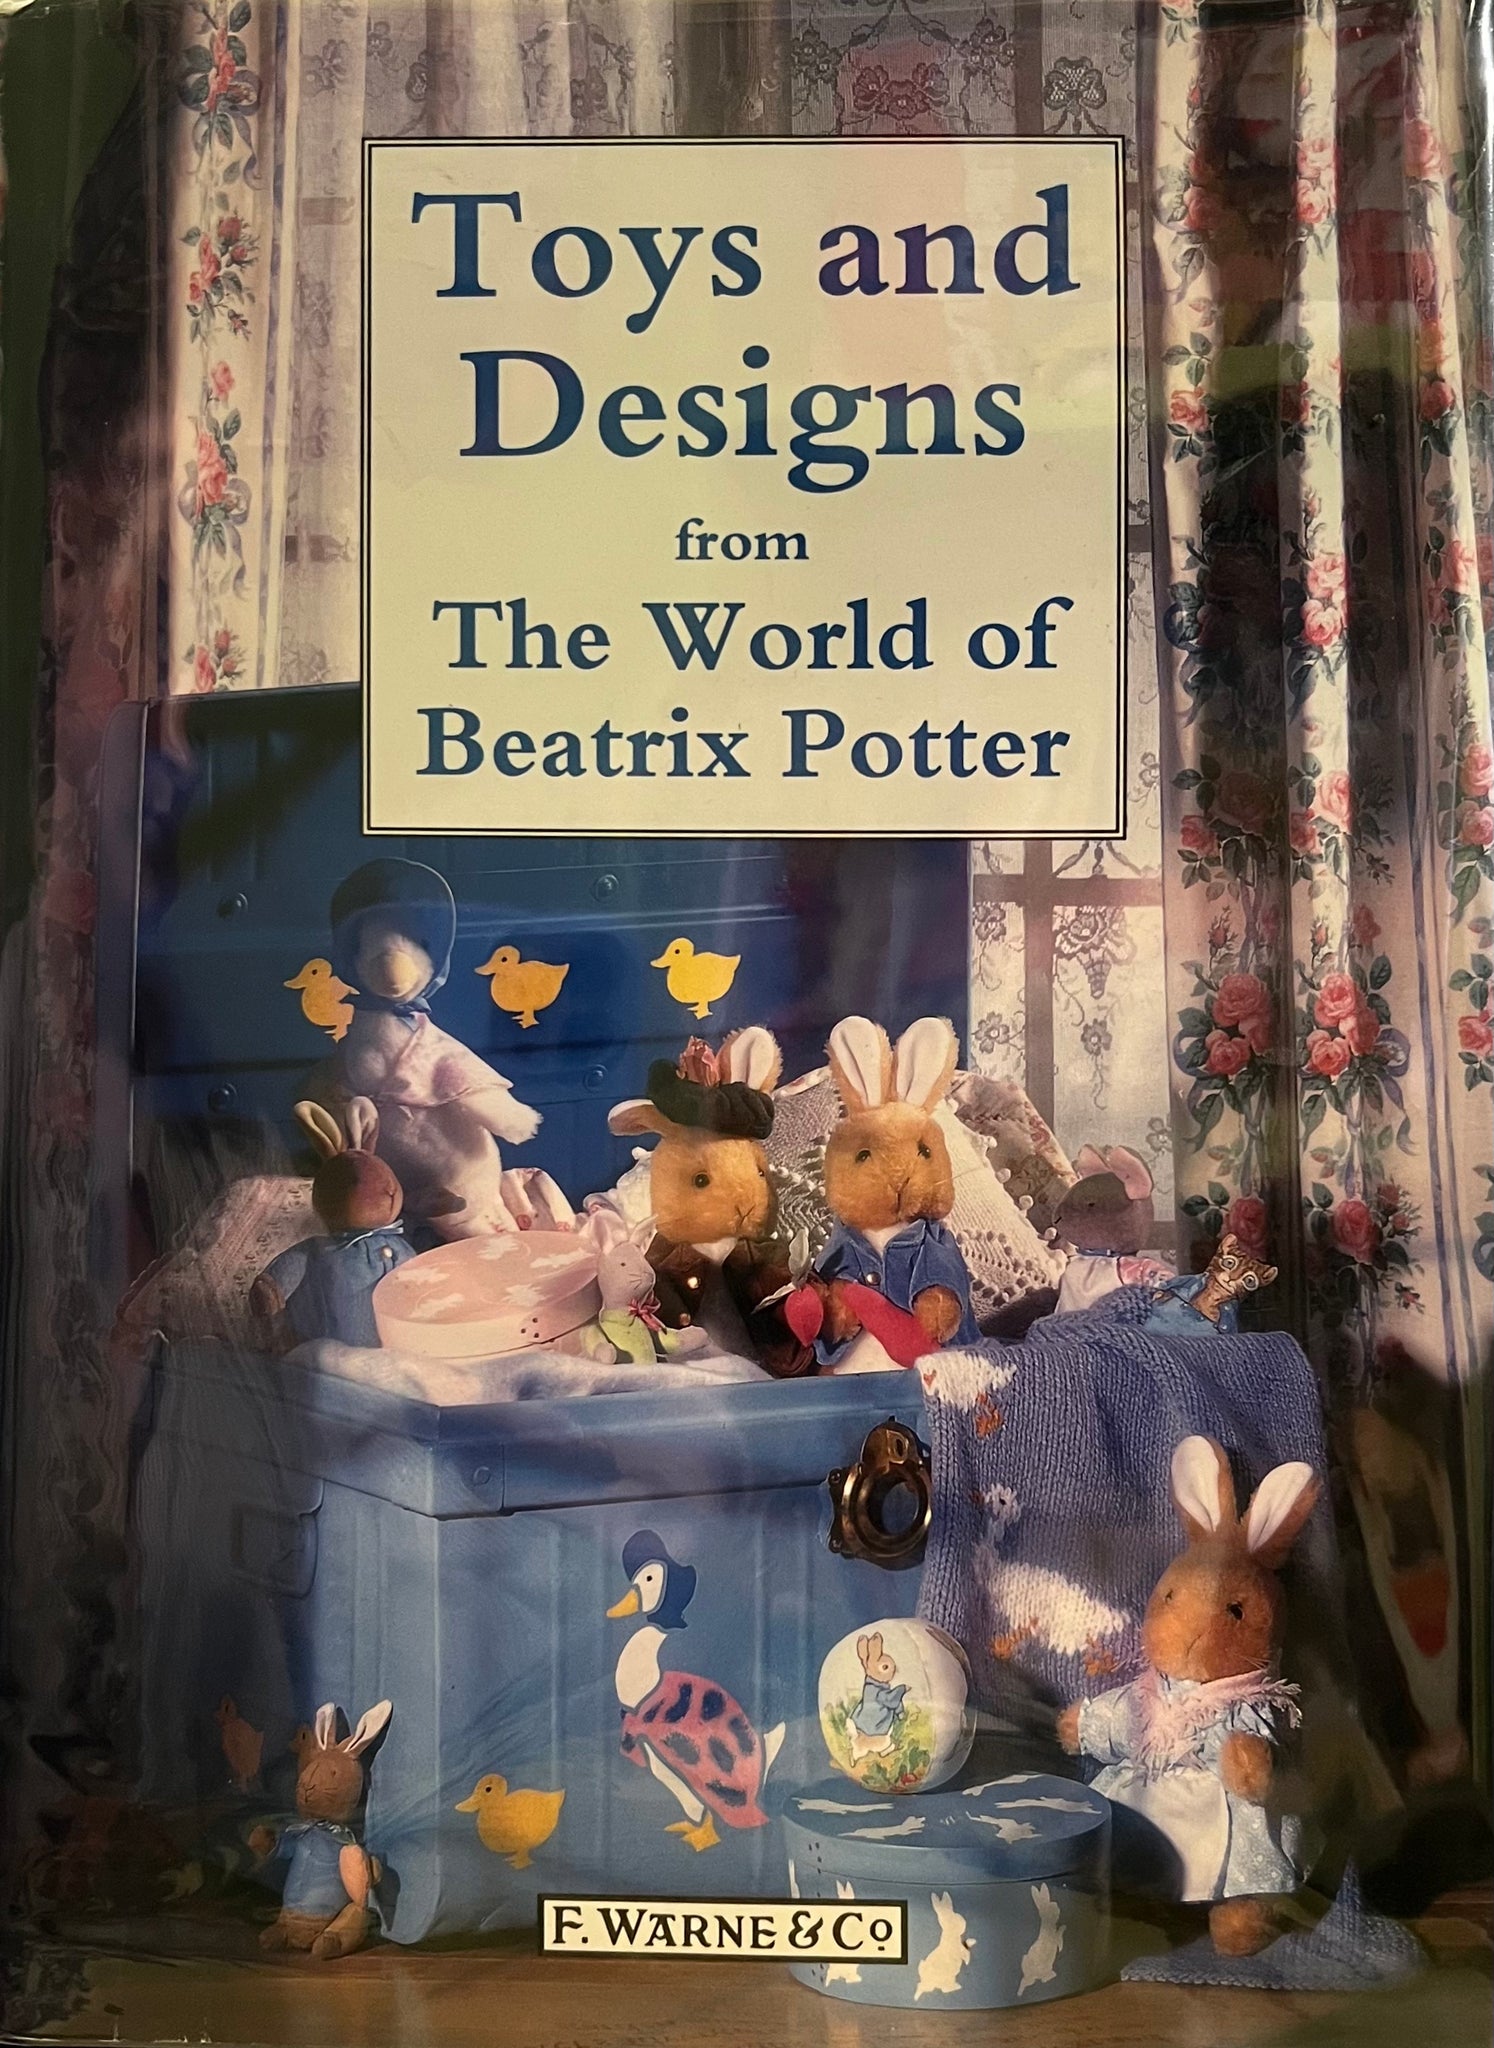 Toys and Designs from The World of Beatrix Potter